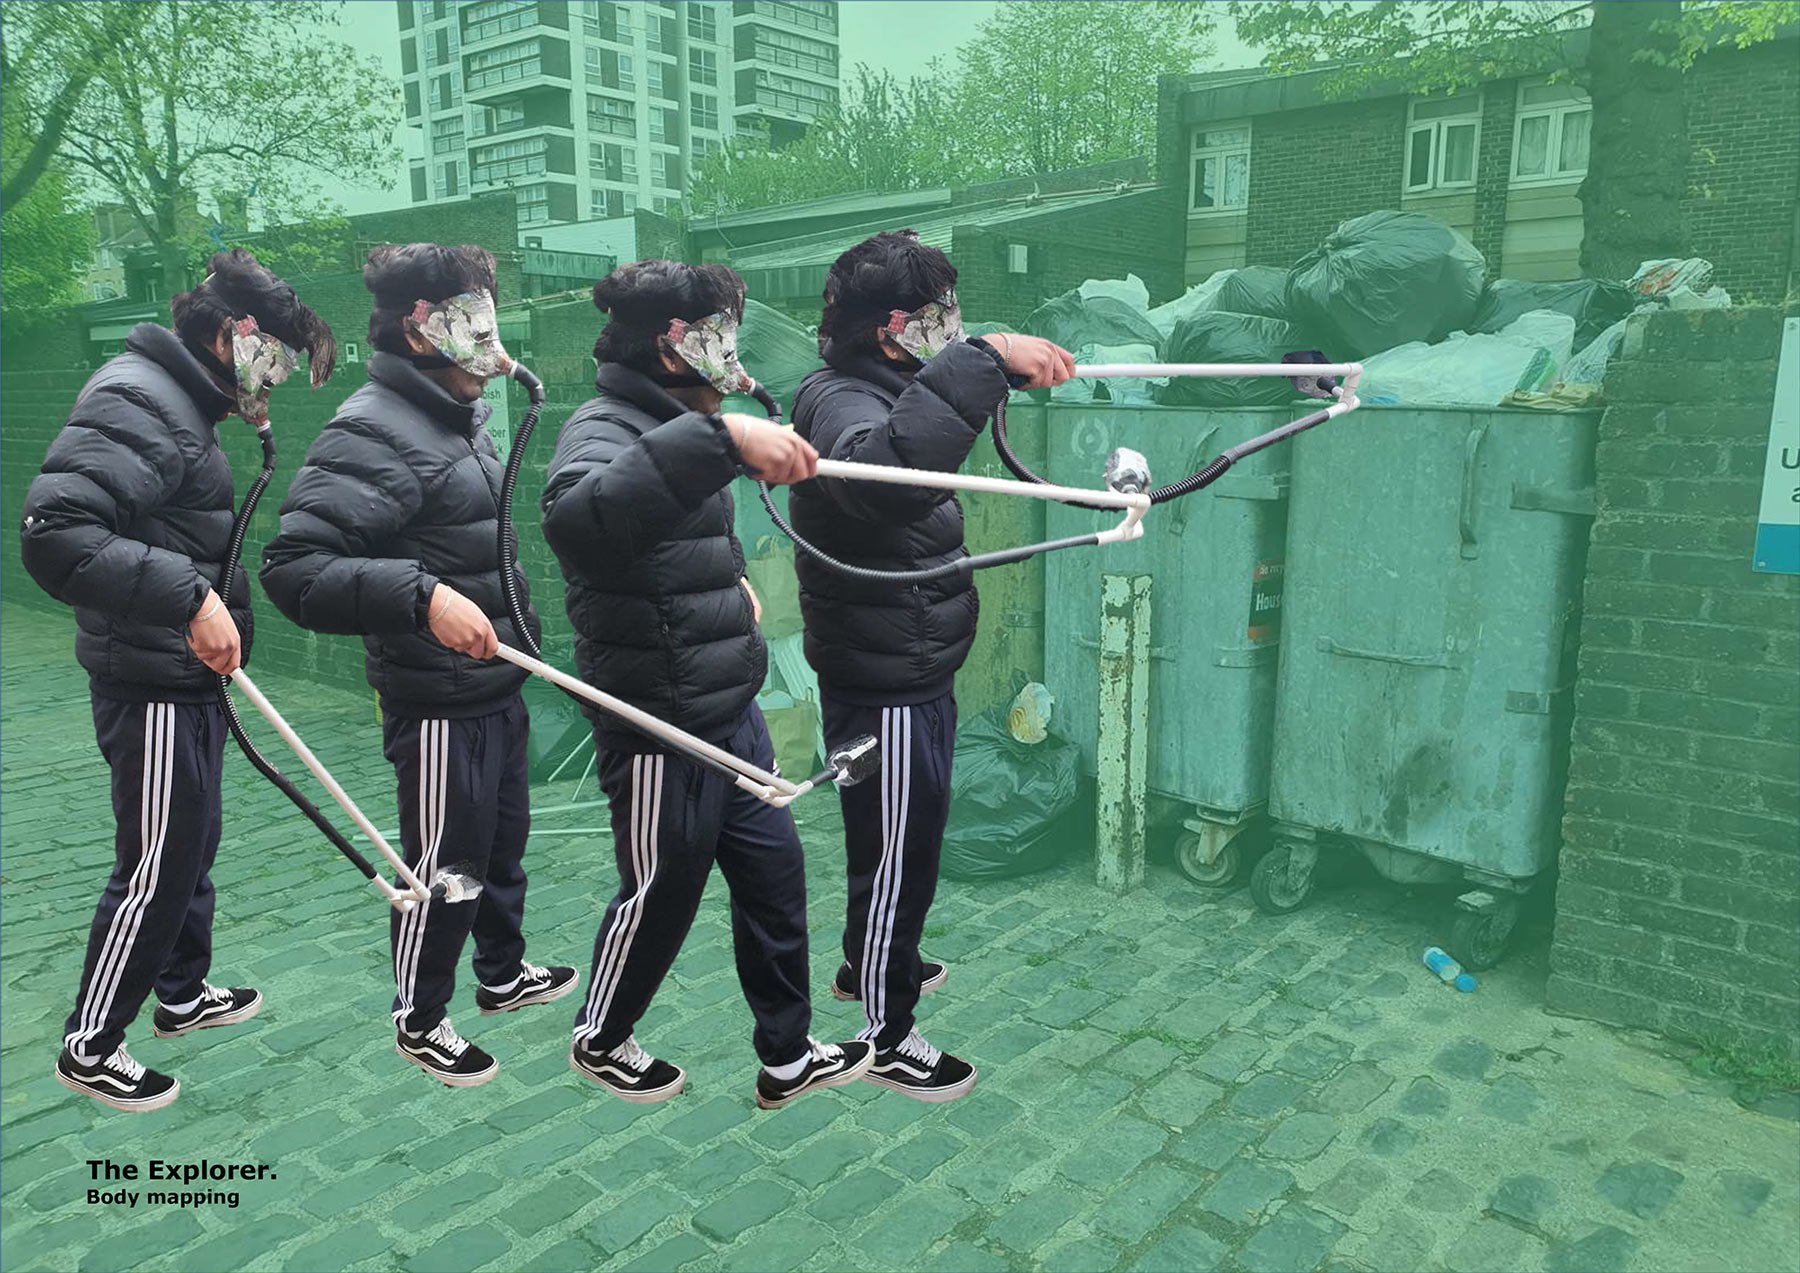 A person wearing a device that looks like a mask with a trunk-like tube attached to the mouth and a longer extension they use to pick up things from the floor. They are gathering garbage with it and throwing it in a bin